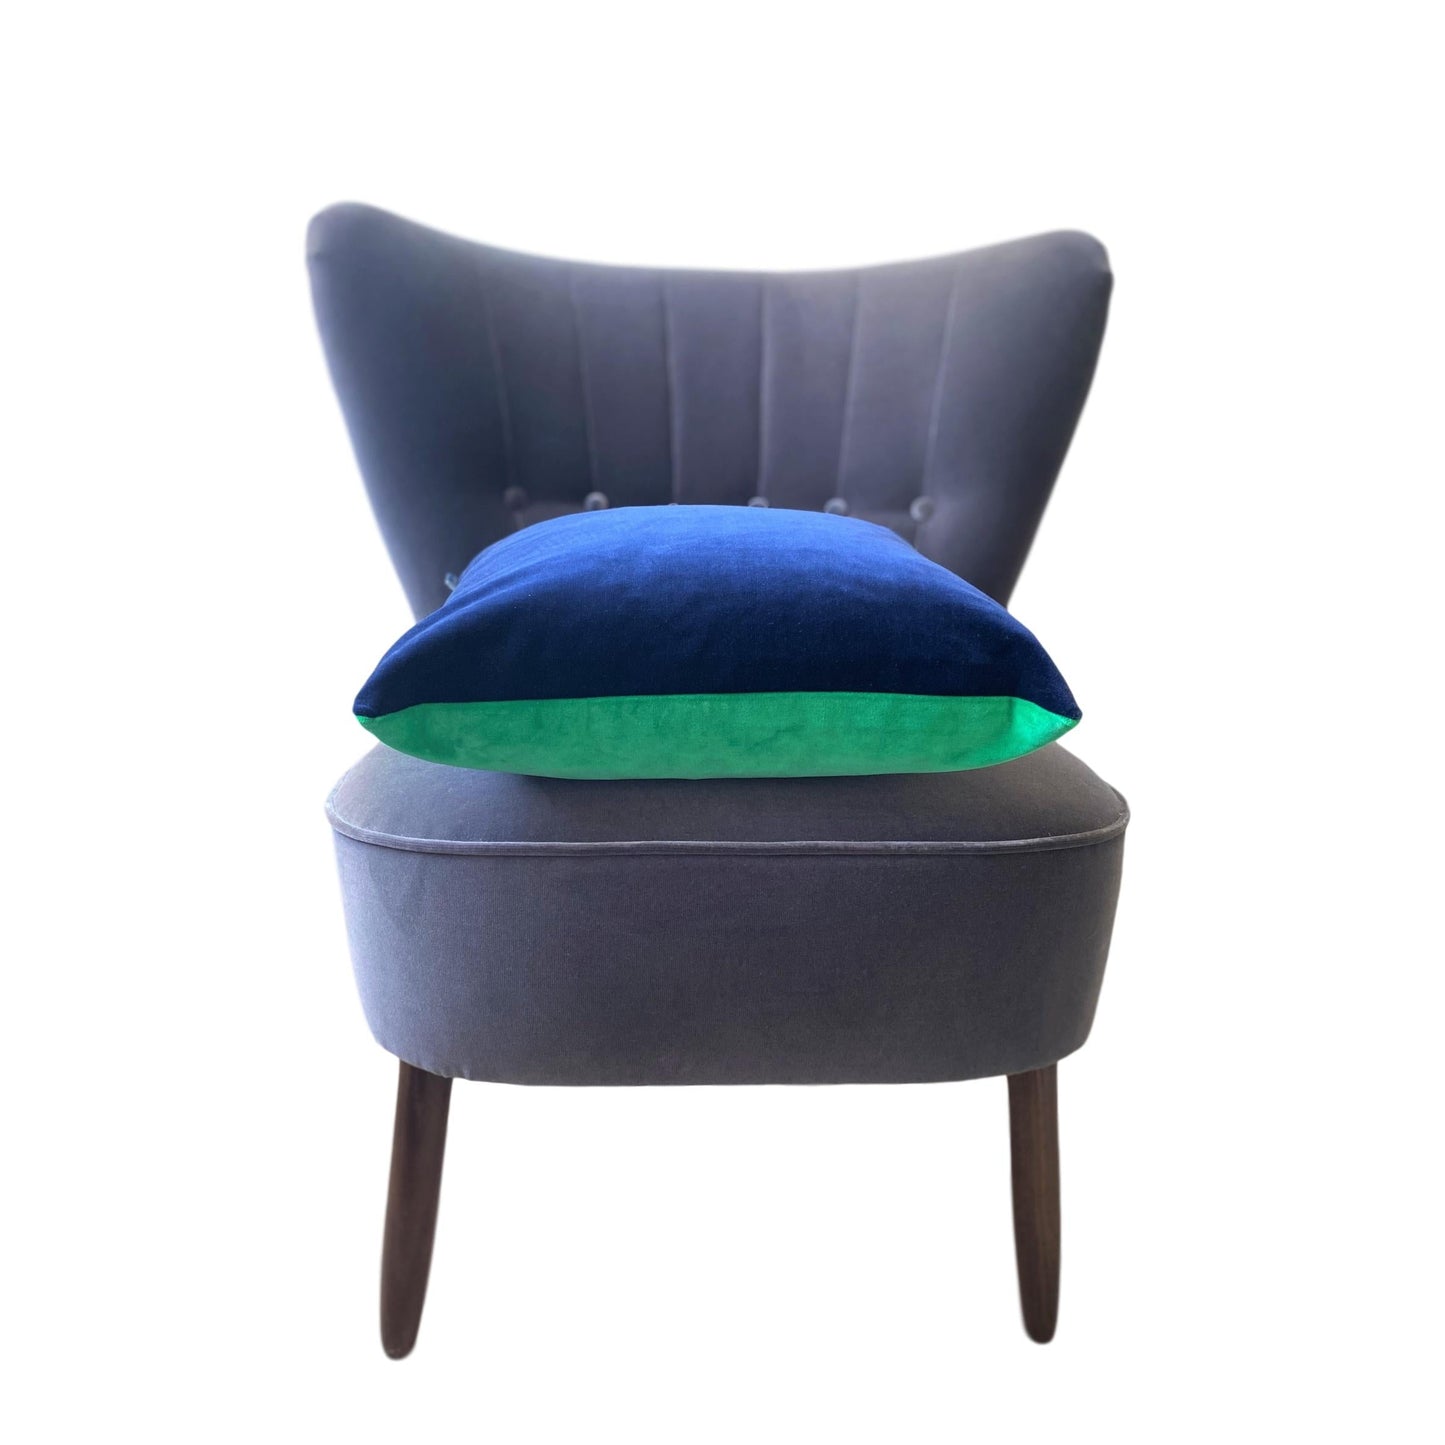 navy velvet cushion cover with emerald green by Luxe 39